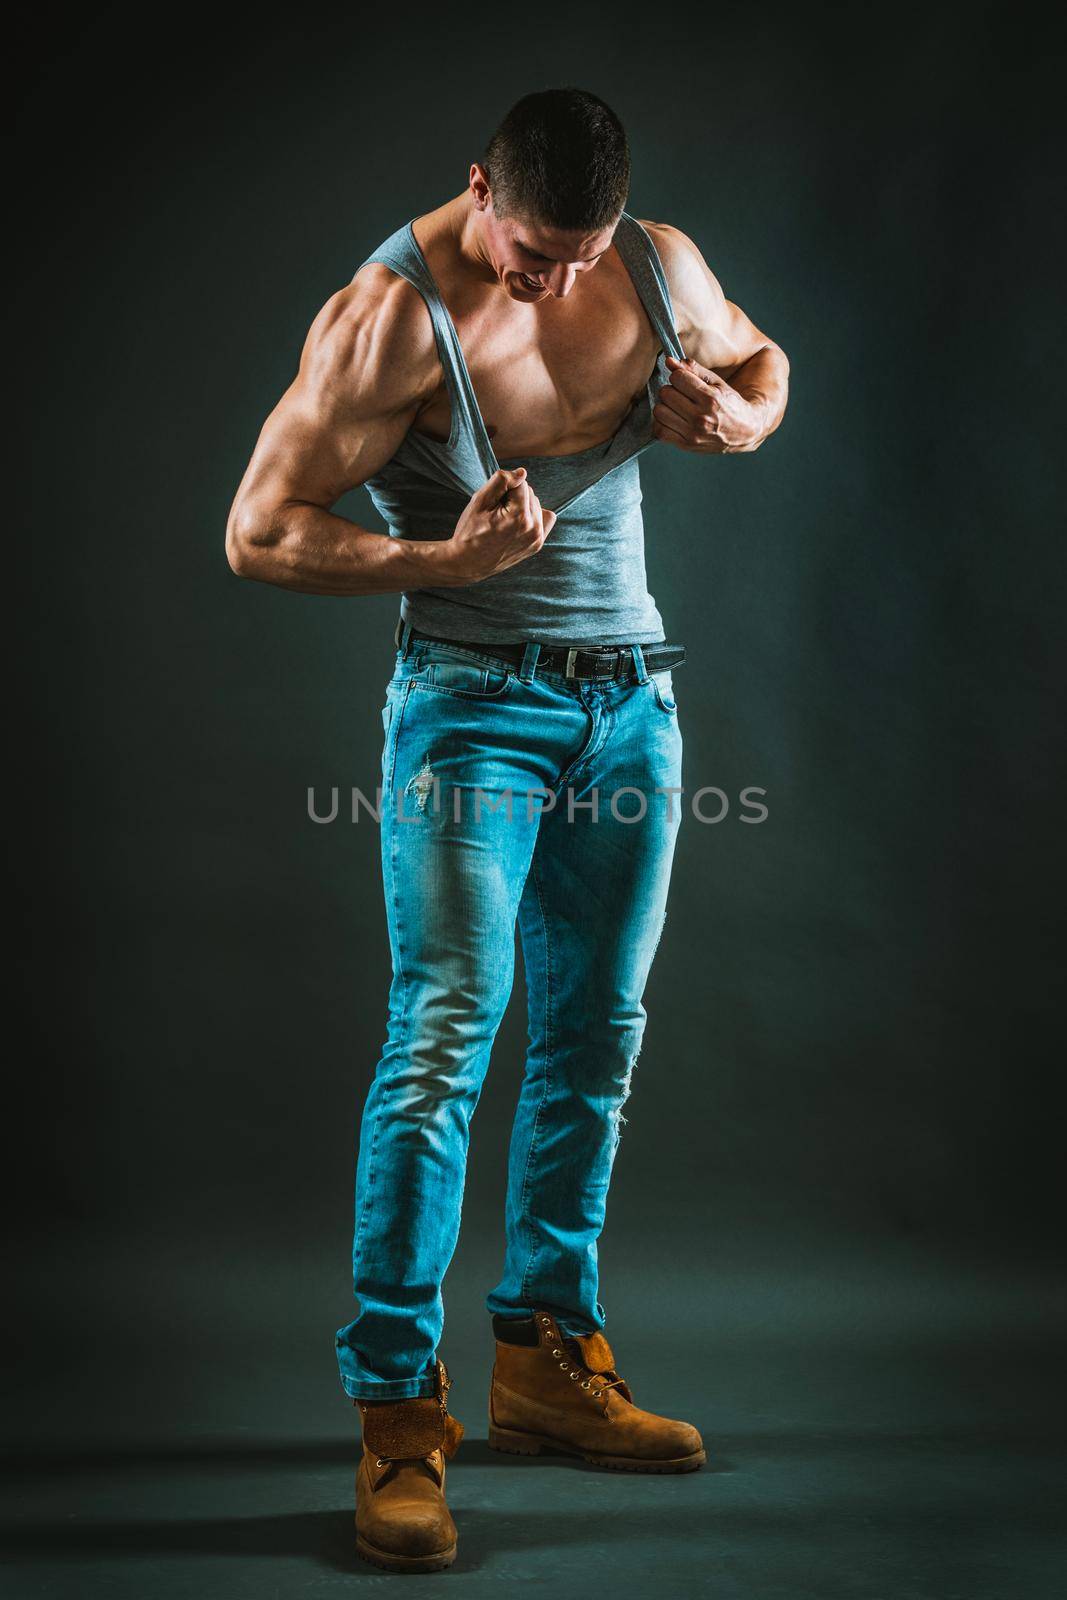 Muscular Male Ripping Shirt by MilanMarkovic78